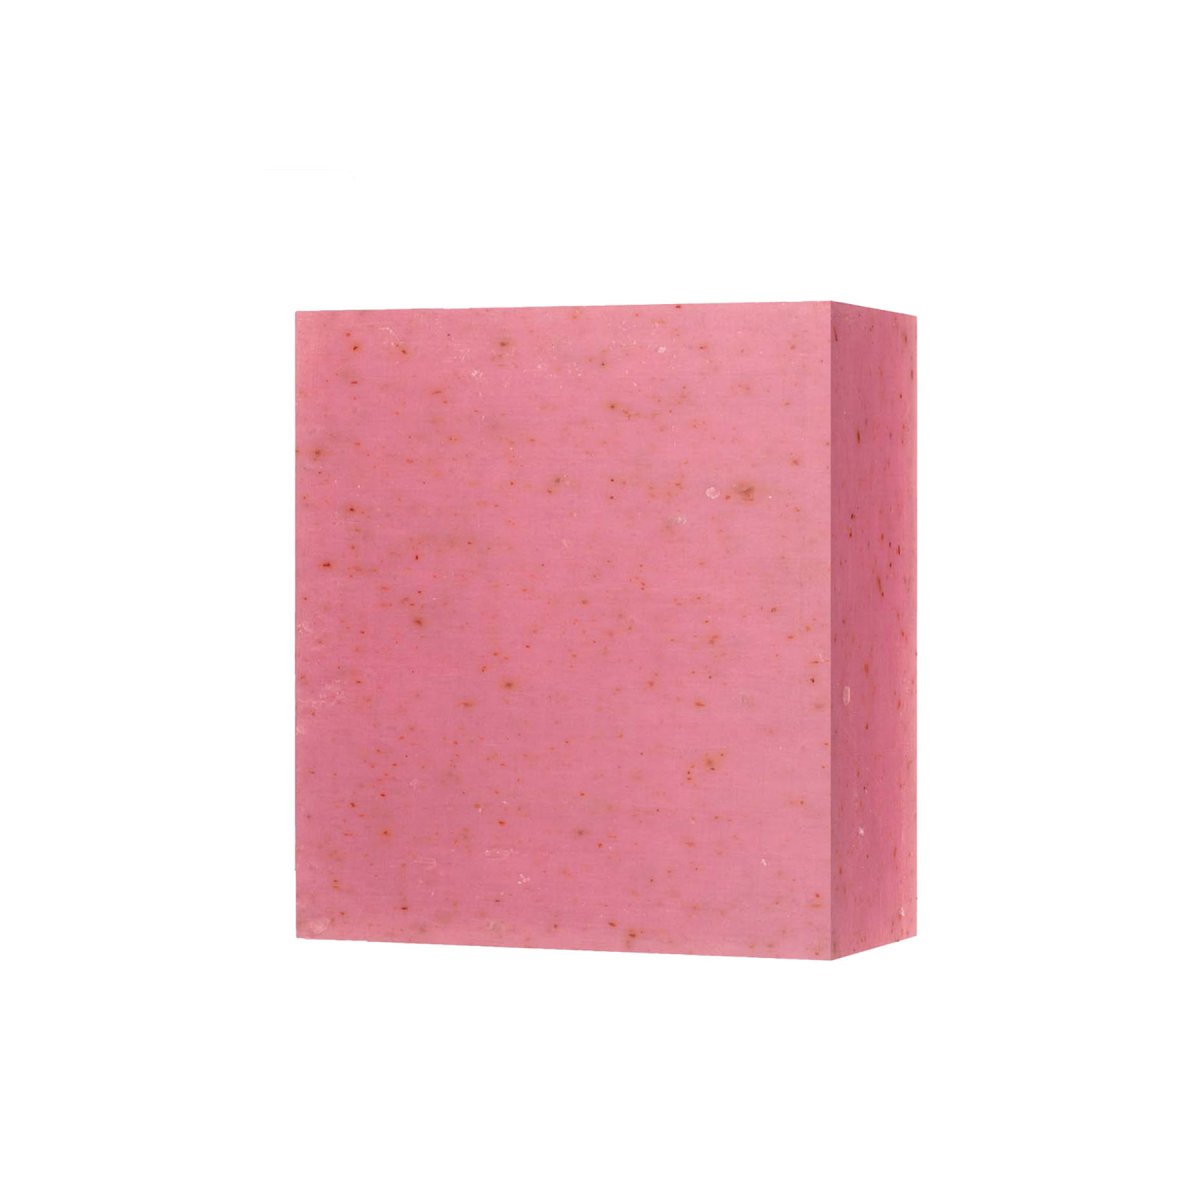 No.80 Rose Cleansing Facial Bar 100g - skinChemists